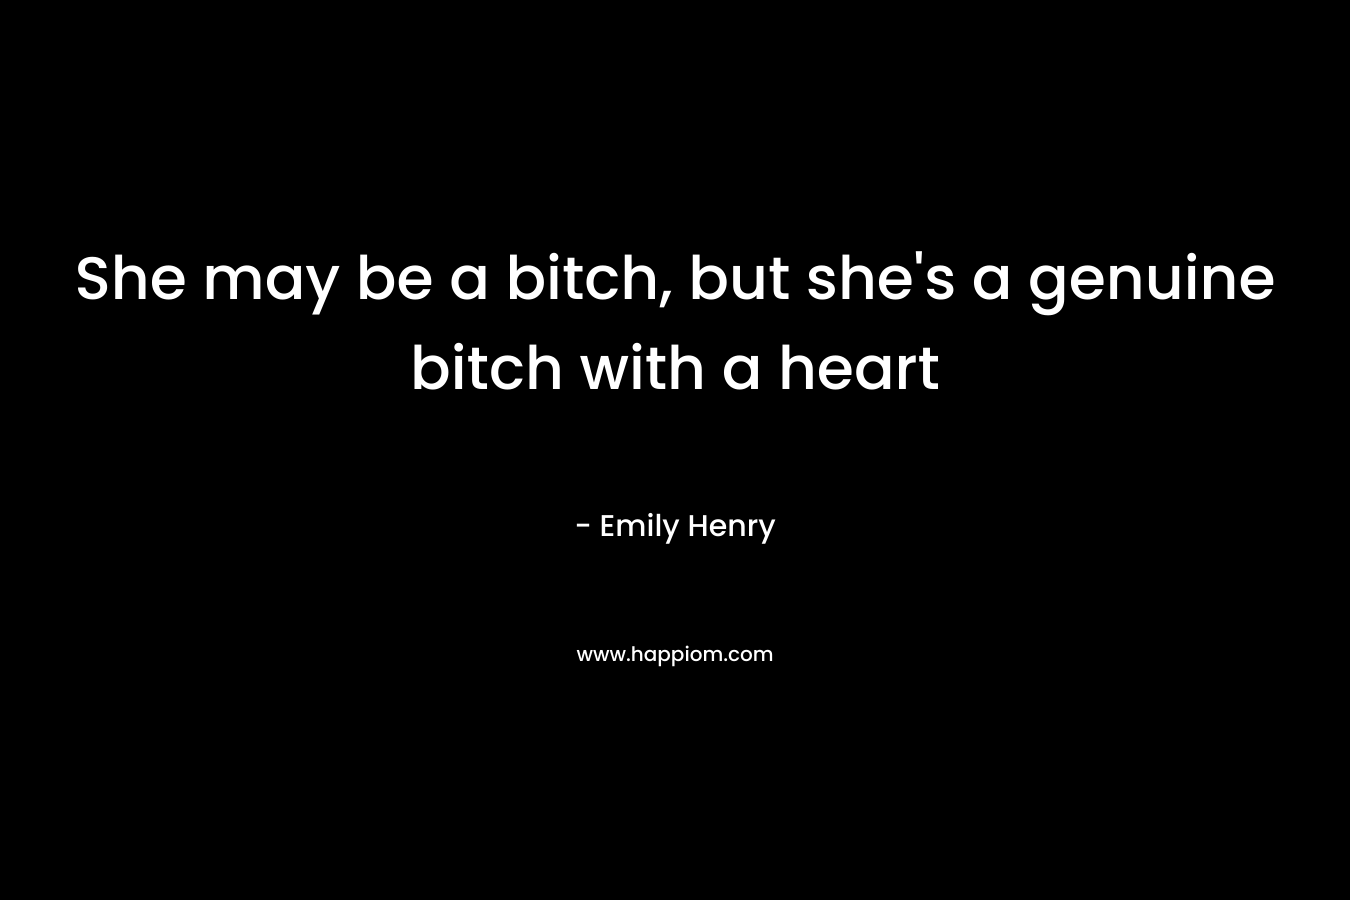 She may be a bitch, but she’s a genuine bitch with a heart – Emily Henry